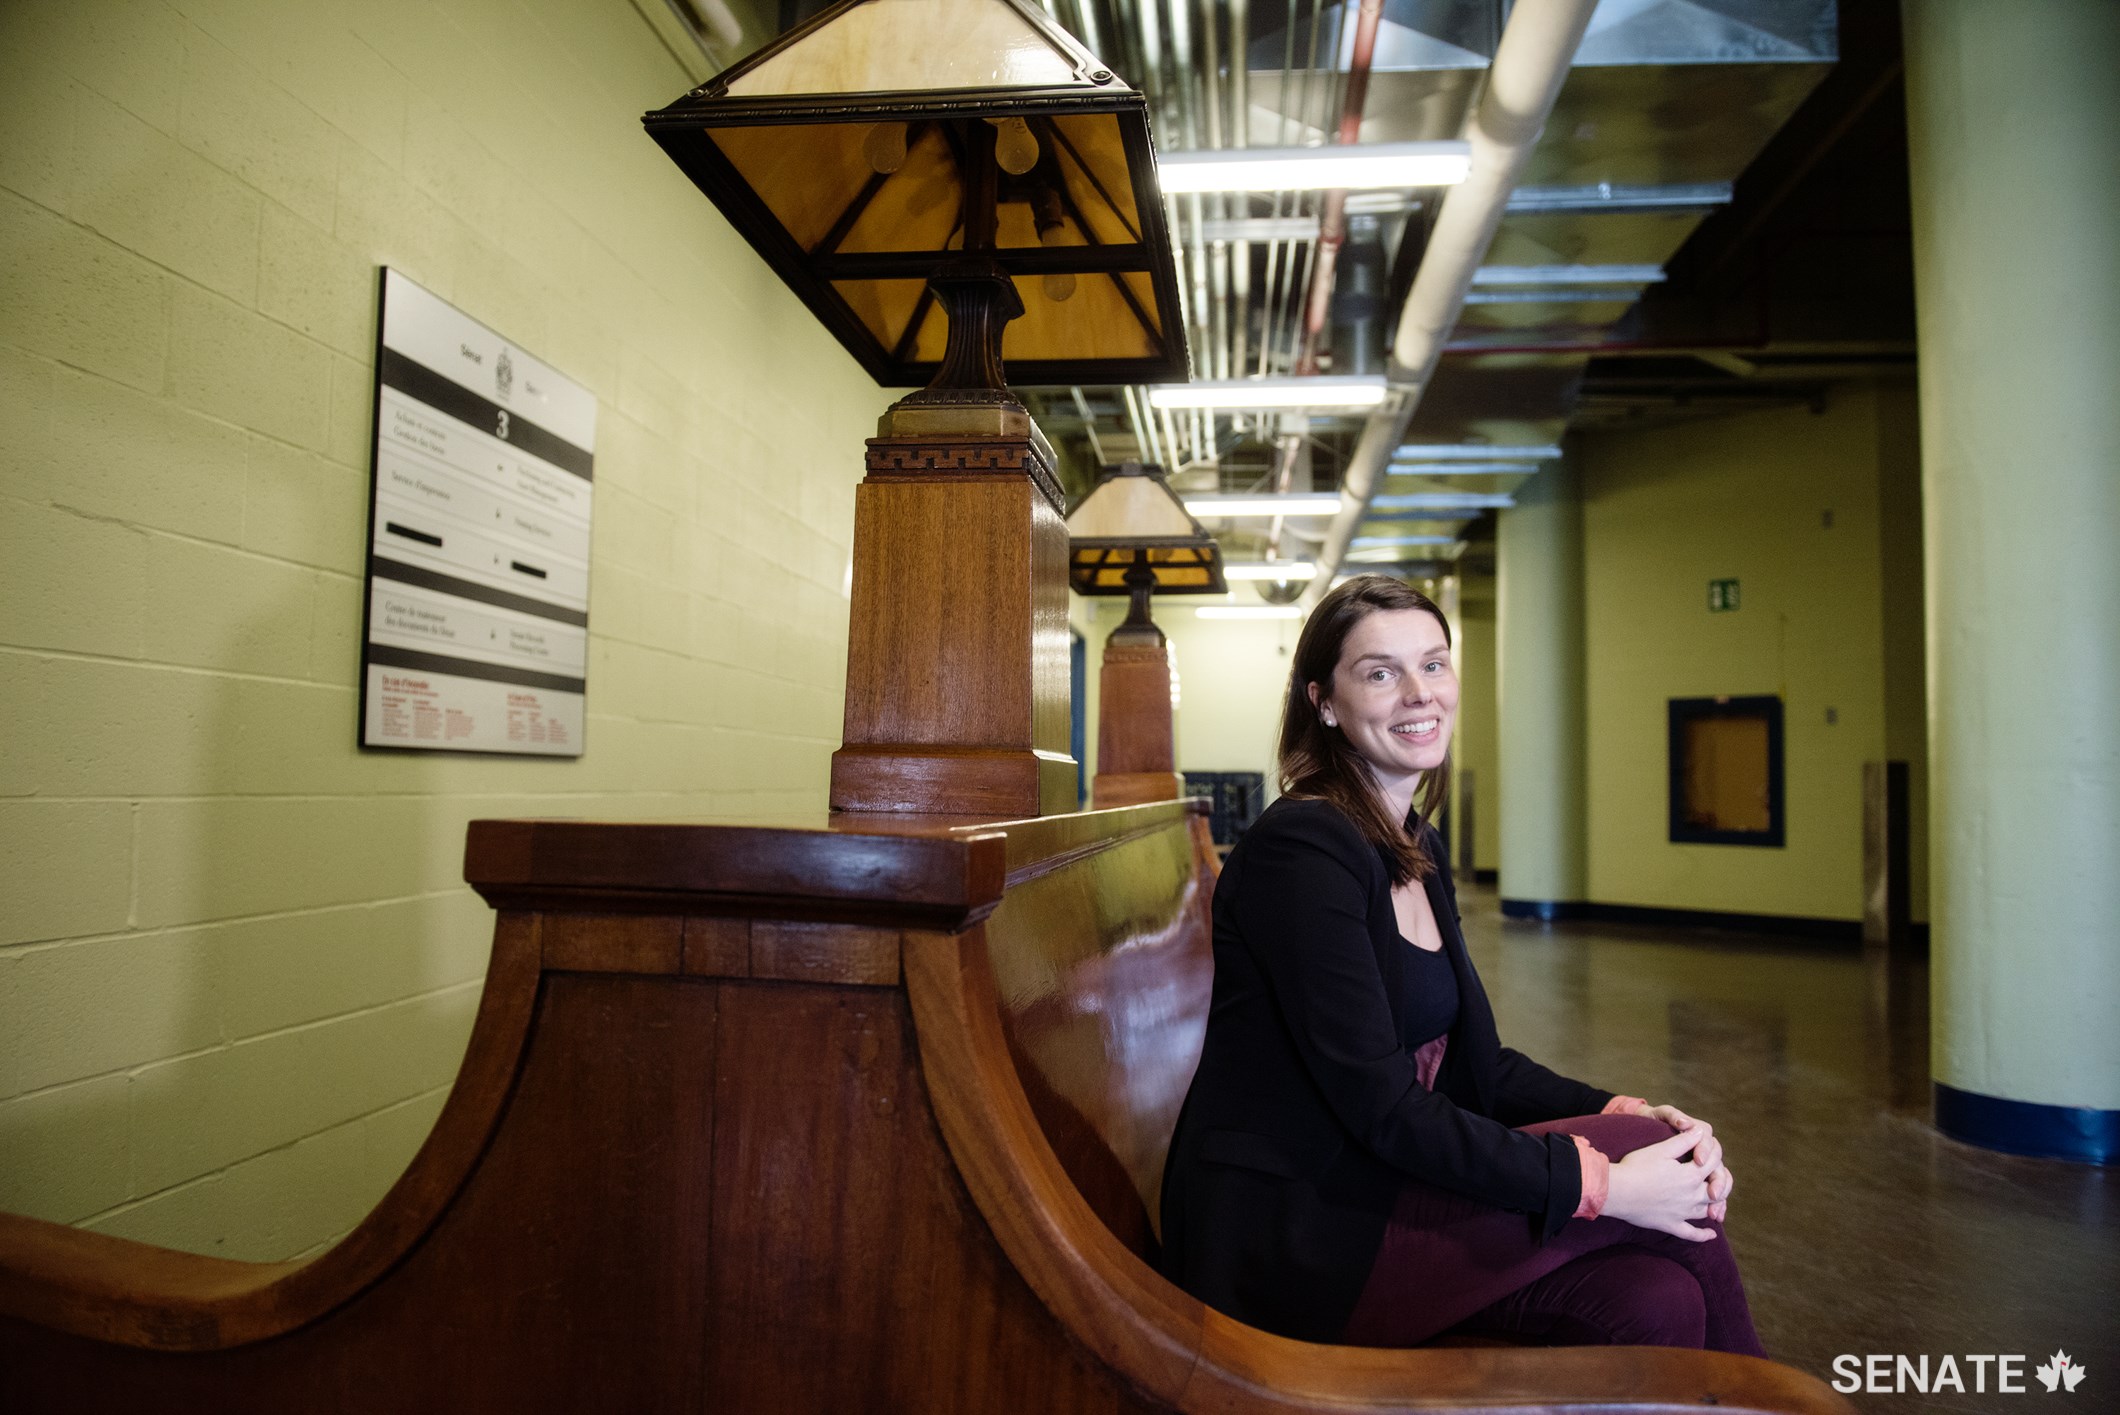 Senate Heritage and Curatorial Services Project Co-ordinator Tamara Dolan helped negotiate the bench’s return to the historic train station, which will become the Senate’s temporary home.